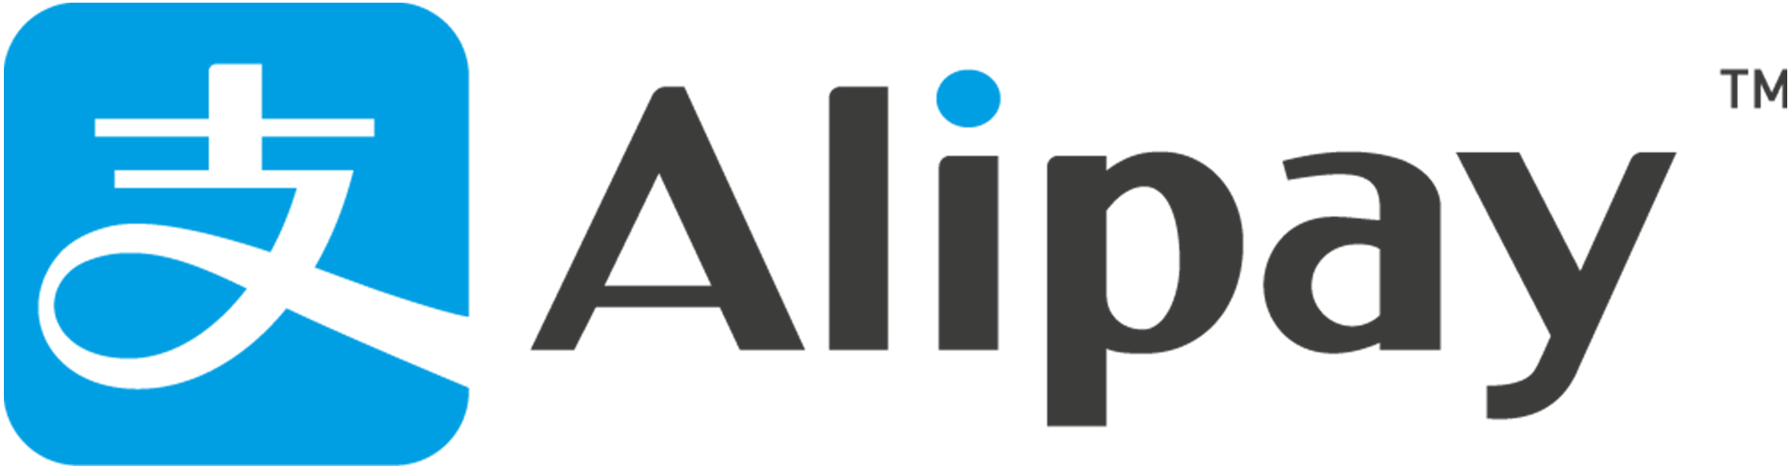 Download 520m Users Alipay Logo Png Png Image With No Background Pngkey Com